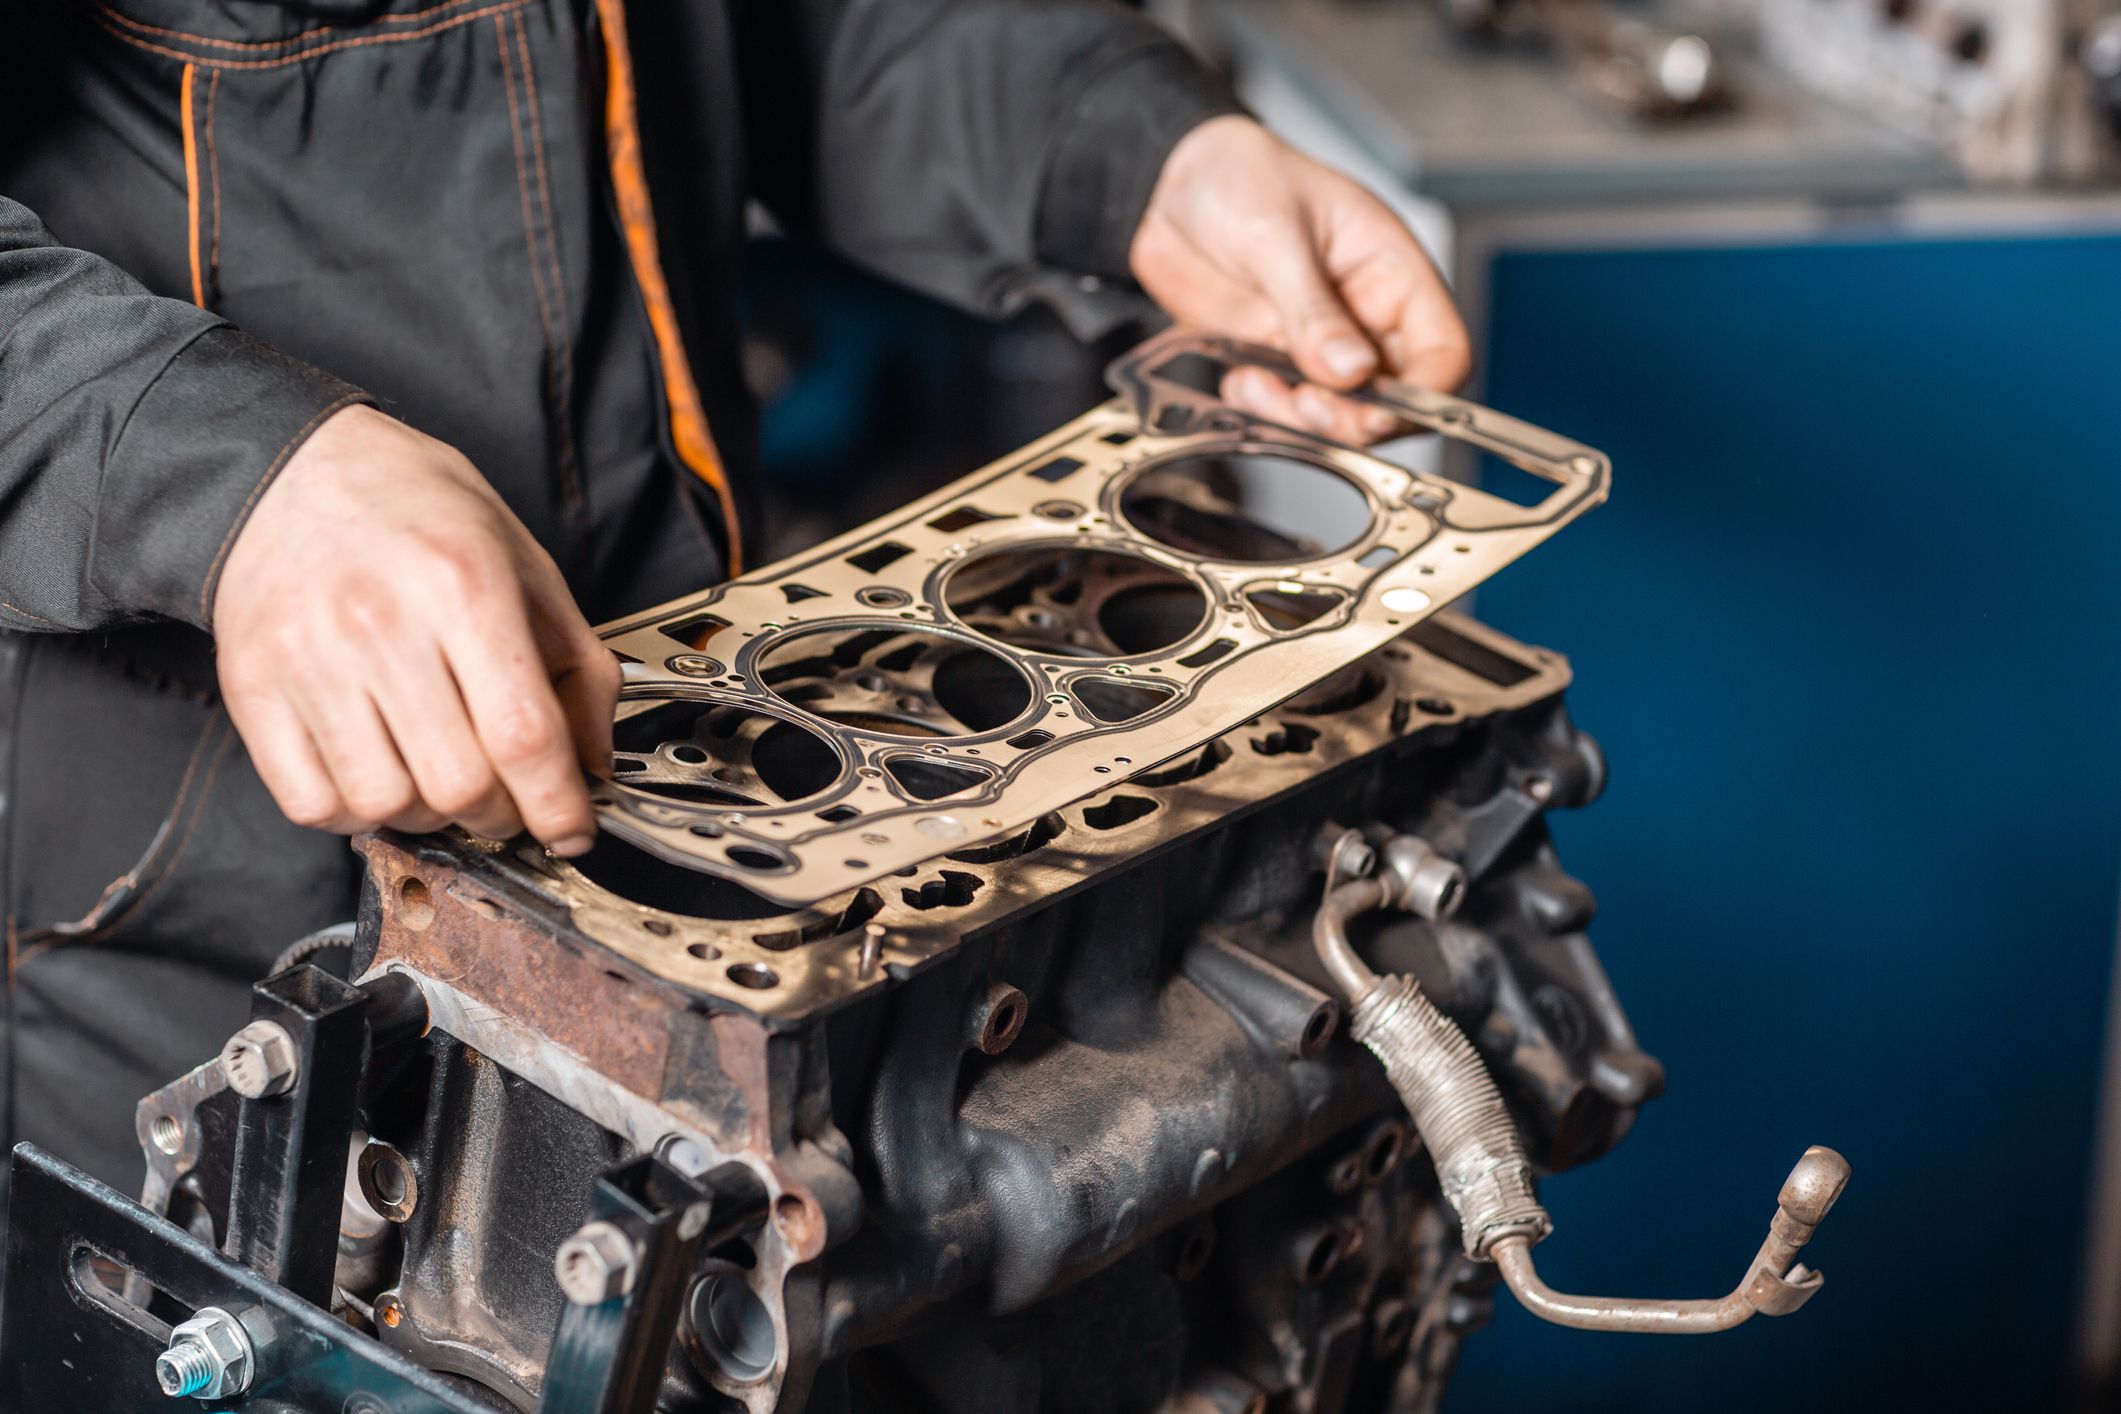 <p class="paragraph">How much? $2,000</p><p class="paragraph">How do you know if you’ve blown your gasket? Steam comes out of the engine in the car and it’s what you see in movies when someone is on the side of the road with the hood up. </p><p class="paragraph">This special gasket stops the car from overheating. If spotted before it blows, it’s a cheap replacement. But if you are on the side of the road with the hood up, it’s gonna cost you in labor and repairs.</p><p class="paragraph">Save money: Your cooling system is what keeps your car from overheating. Taking your car in for regular oil changes can help prevent issues as mechanics will look for leaks, check your radiator and top off your coolant.</p>